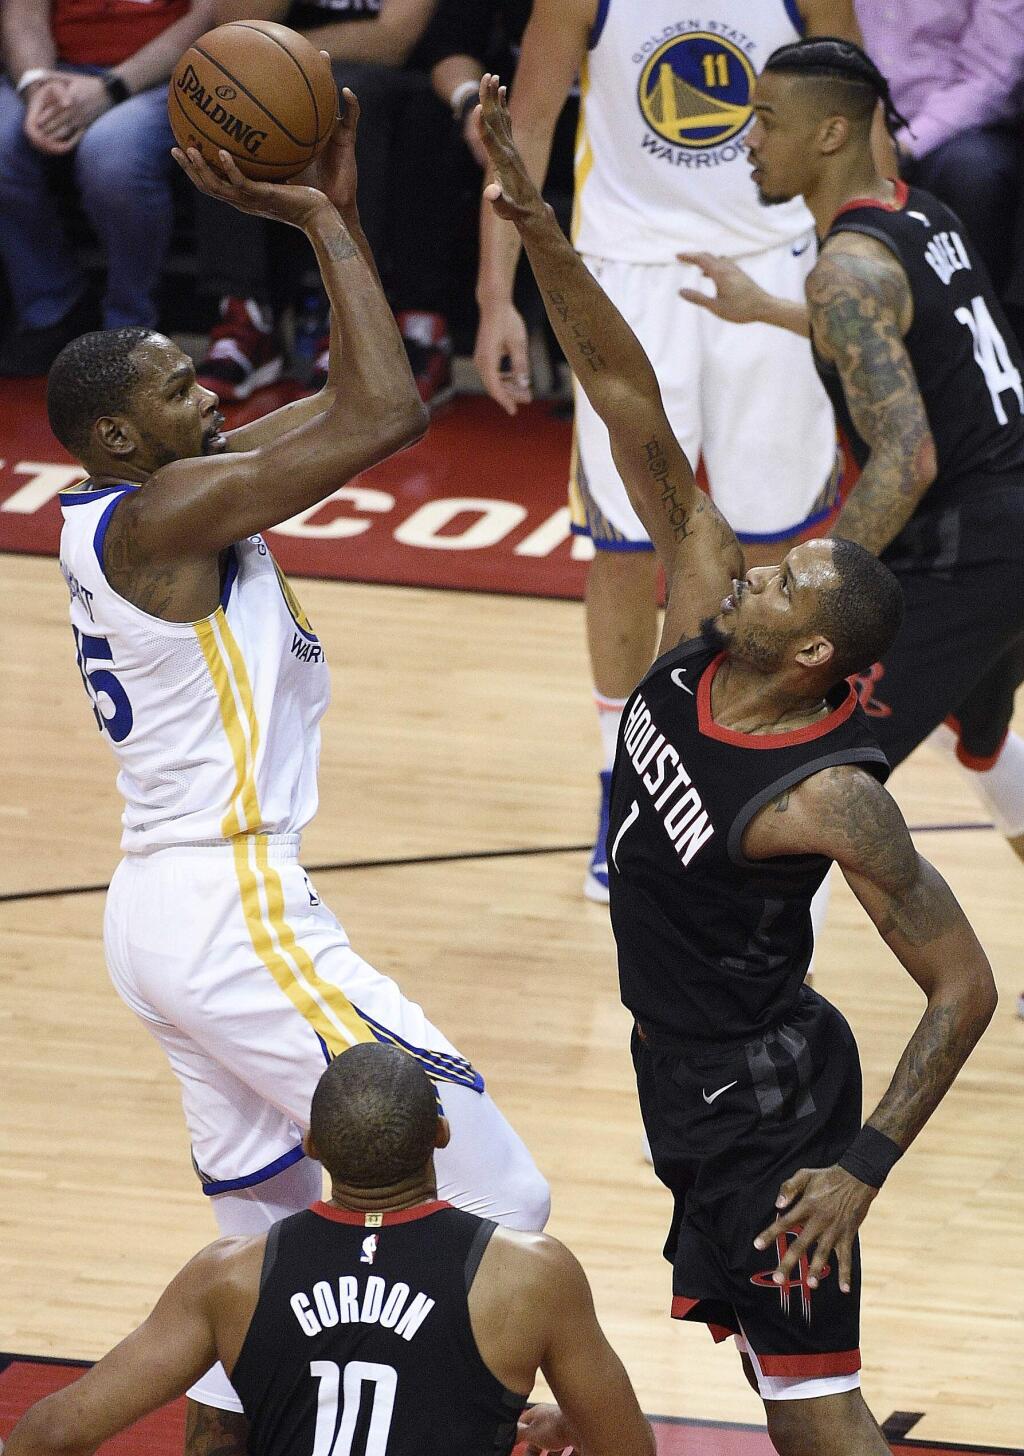 Golden State Warriors forward Kevin Durant, left, shoots as Houston Rockets forward Trevor Ariza defends during the first half of Game 2 of the NBA basketball playoffs Western Conference finals Wednesday, May 16, 2018, in Houston. (AP Photo/Eric Christian Smith)